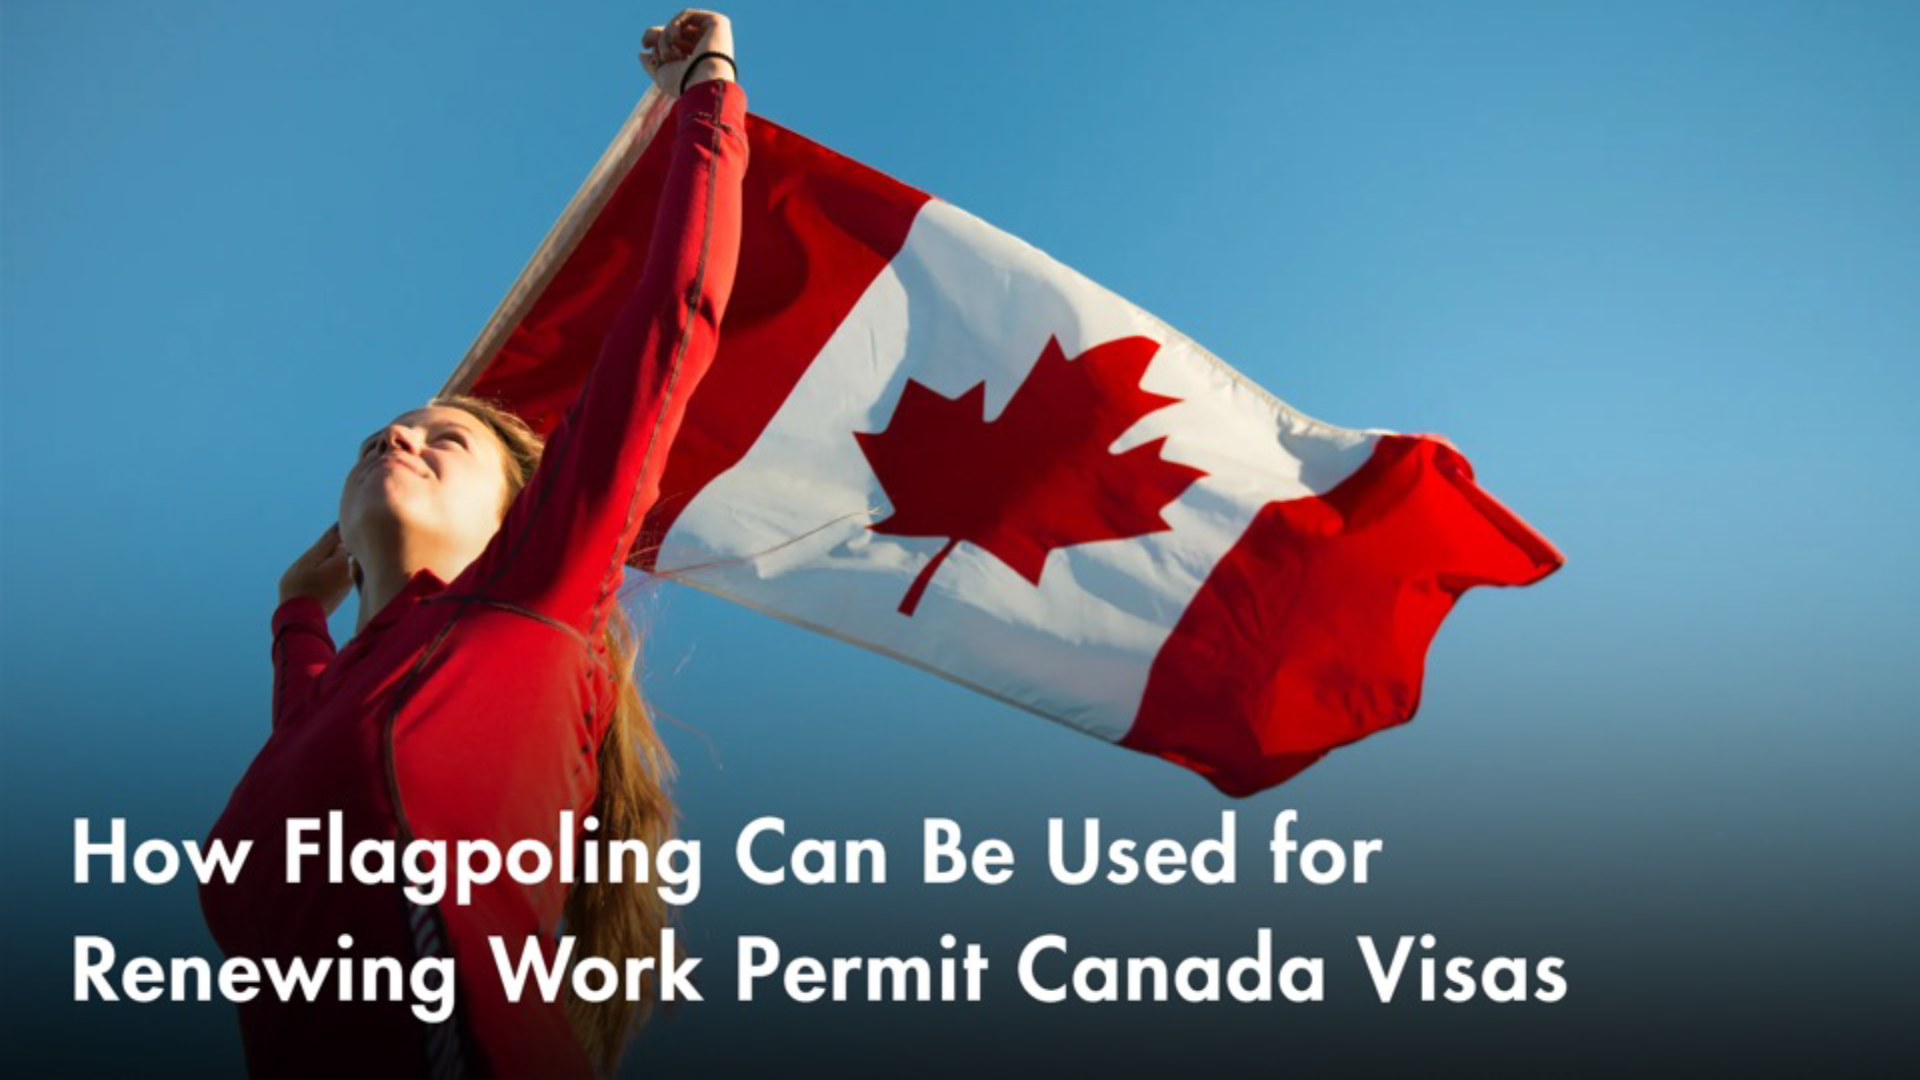 Banner - How Flagpoling Can Be Used for Renewing Work Permit Canada Visas